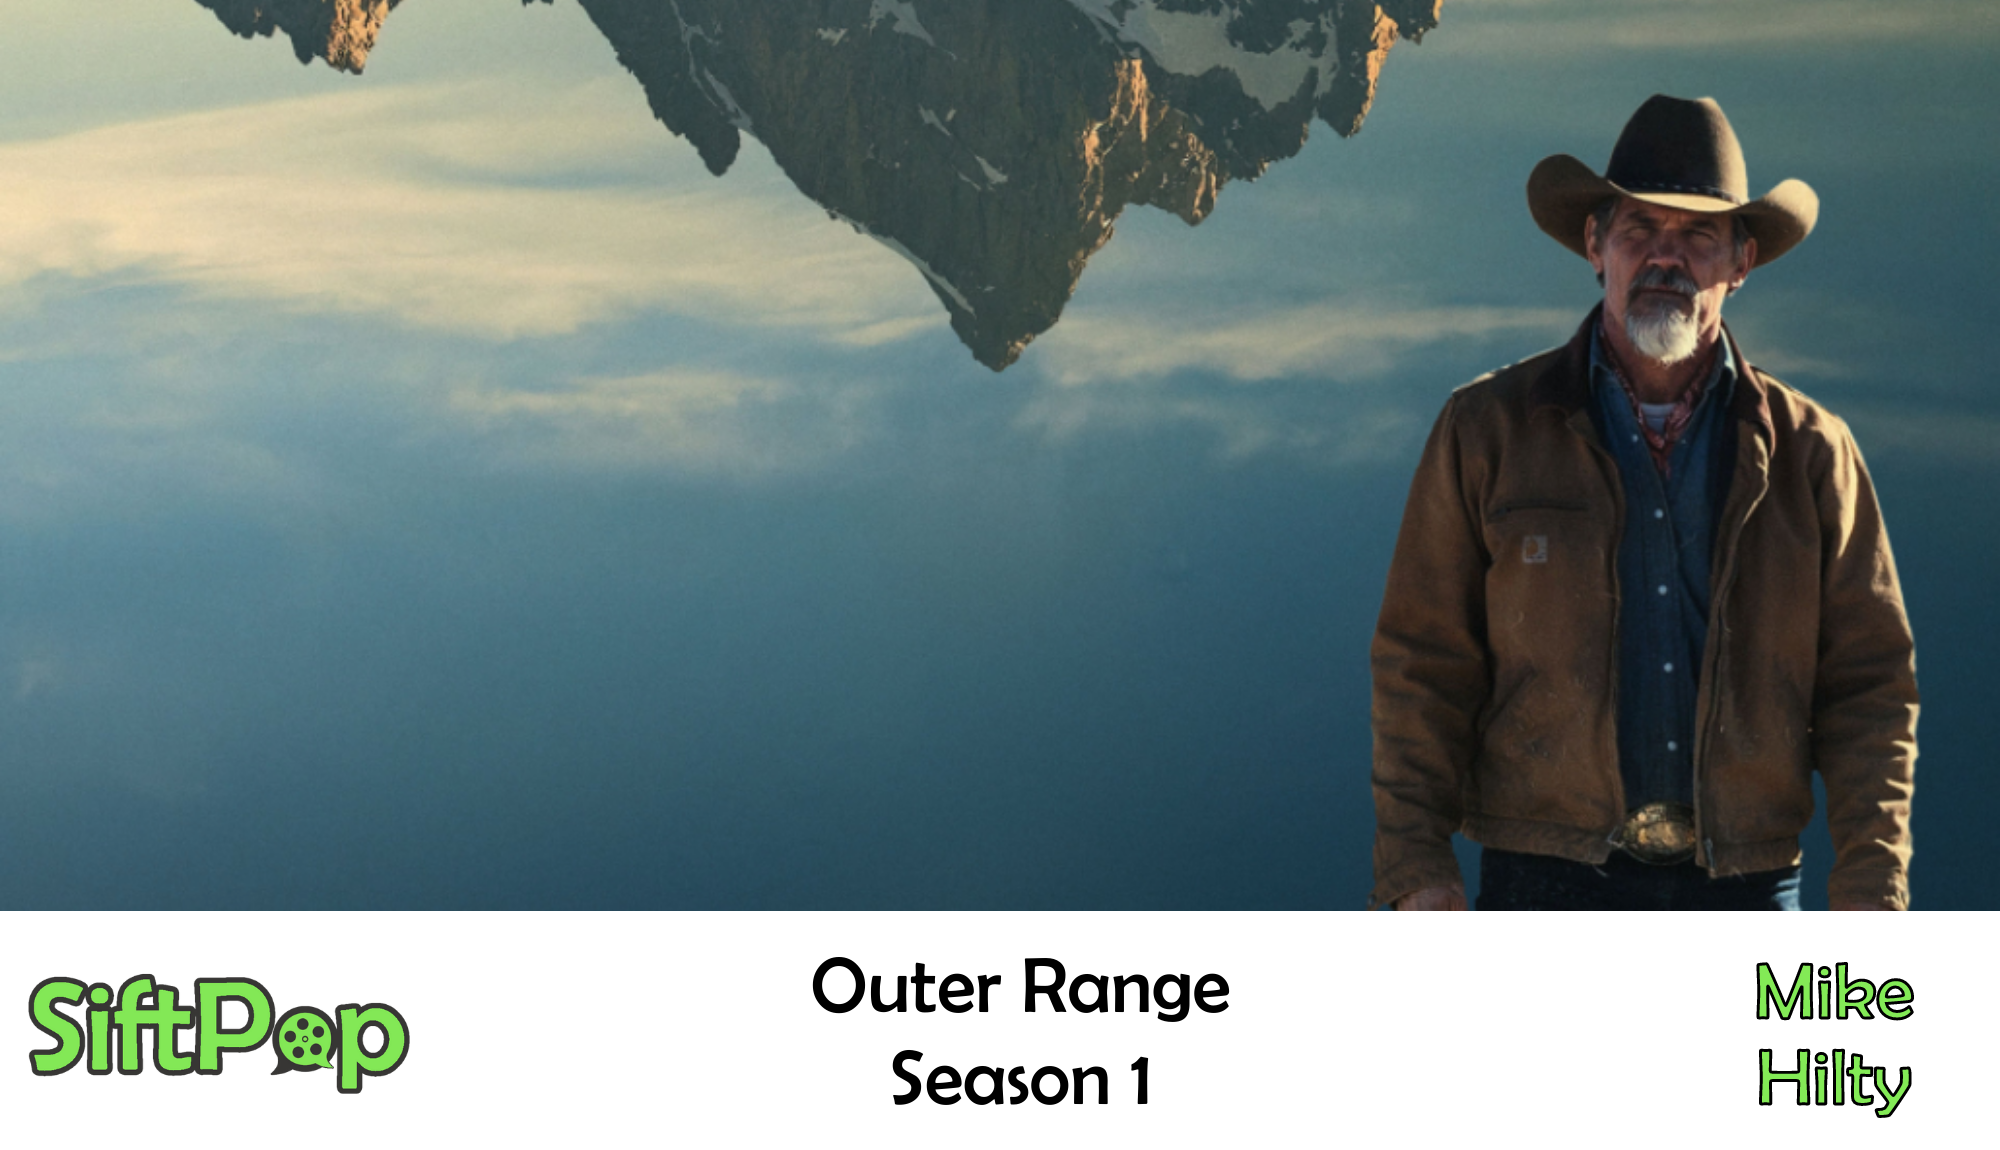 SiftPopShould You Be In On Outer Range? (TV Show Review)